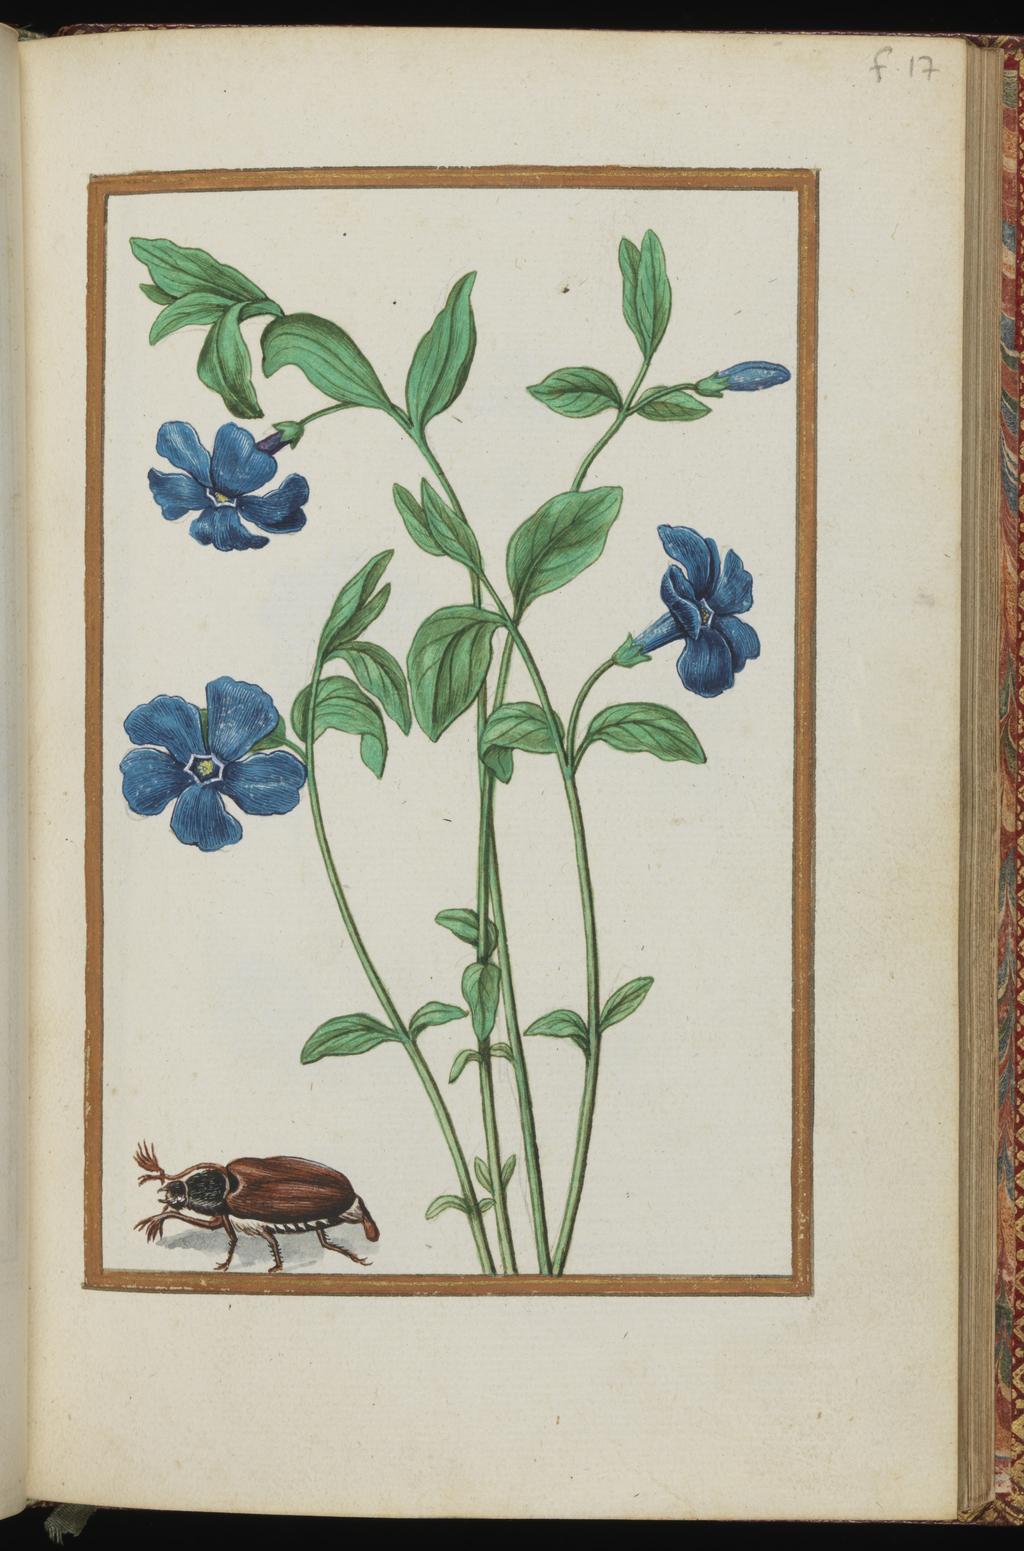 An image of Vinca major. Periwinkle with a beetle. Album containing a dedicatory sonnet and 48 drawings. Pinet, Antoine du (French, op. c. 1584). Each of the drawings is framed by a border of gold paint of varying size according to the depth of the painted area. The drawings on white laid paper, watermarked with a bunch of grapes are bound into an album with a contemporary gold-tooled limp vellum cover bearing the arms, recto and verso of Louise of Lorraine (1553-1601). This, in turn, is bound into an eighteenth century French red morocco gilt binding. The spine is lettered in gold (see 'inscriptions/marks'). Each of the drawings is framed by a border of gold paint of varying size according to the depth of the painted area. Blank ff not detailed elsewhere. Height, sheet size, 204 mm, width, sheet size, 139 mm.